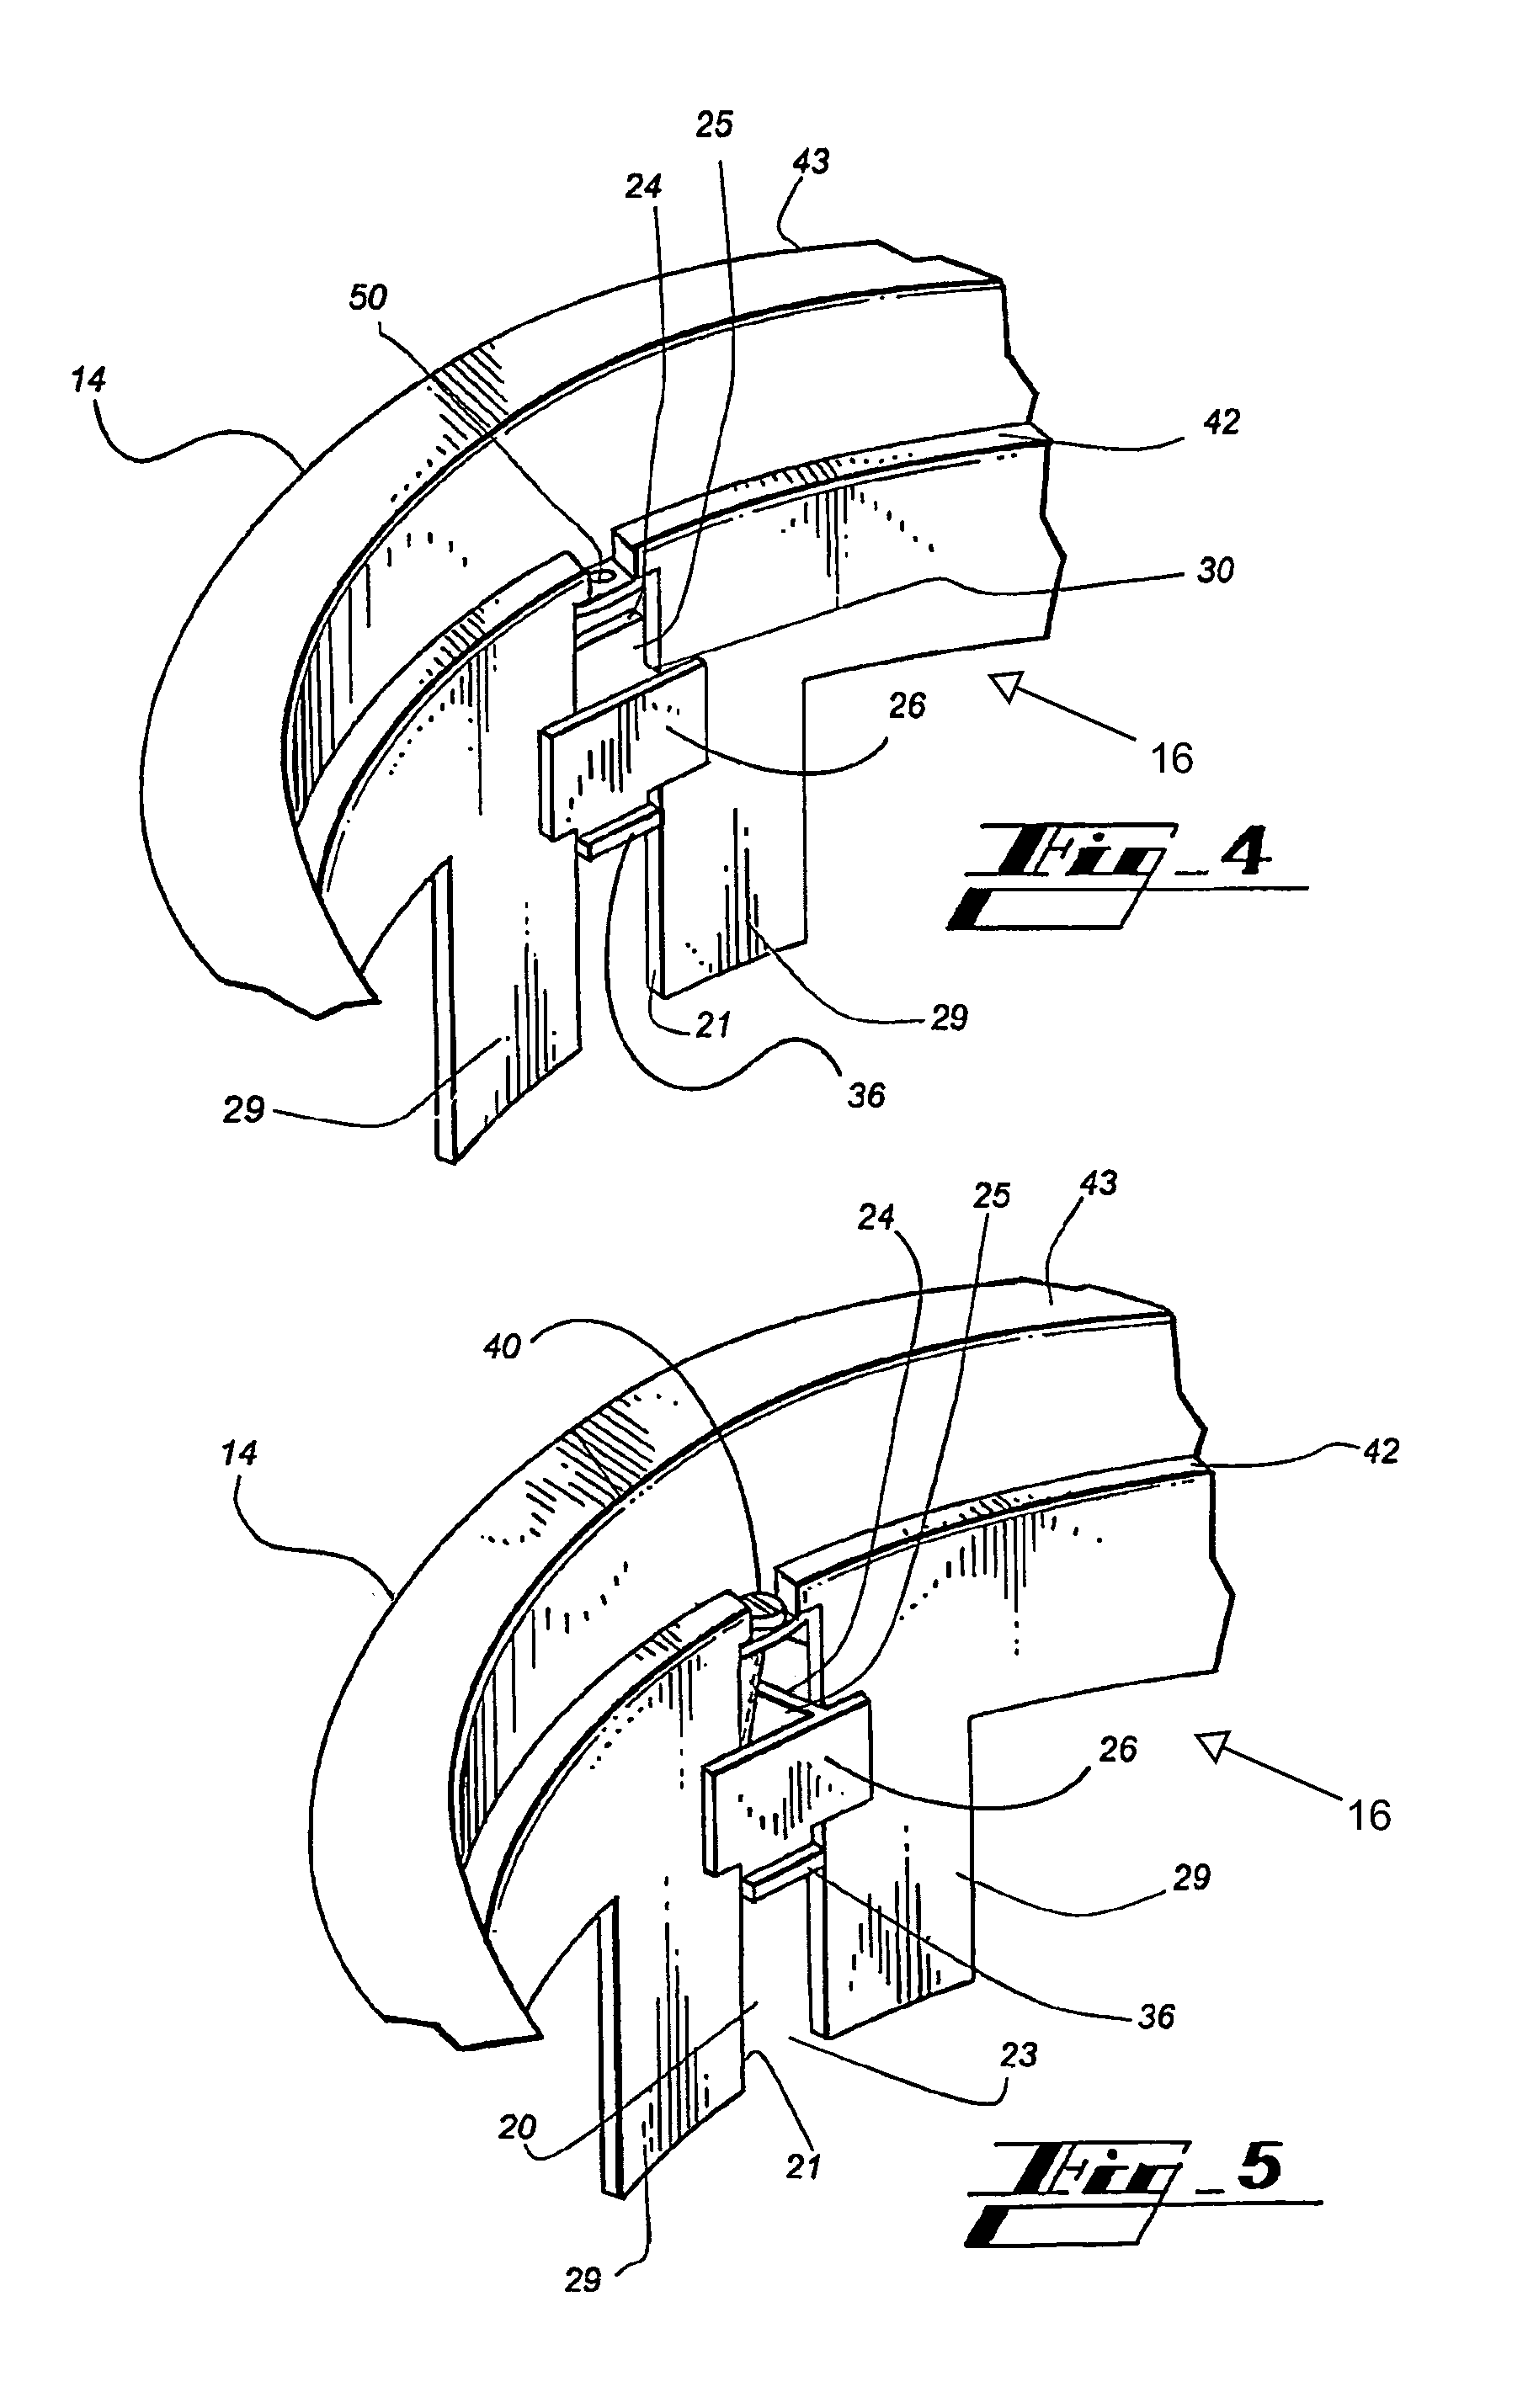 Diffuser mounting flange